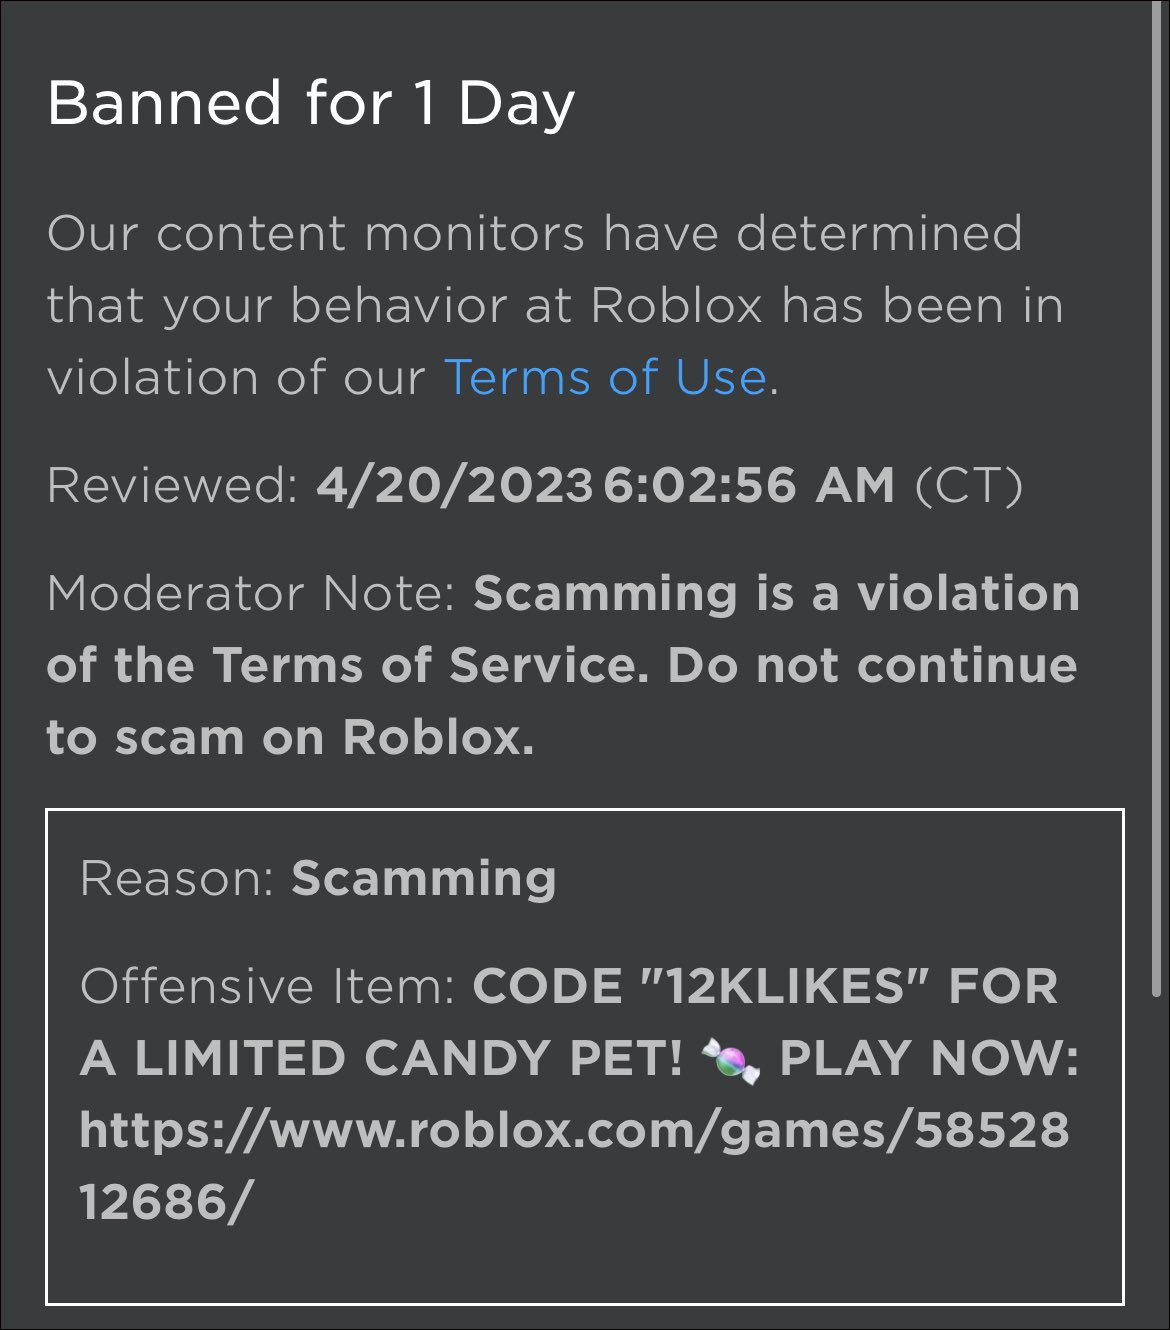 Roblox Trading News on X: RblxTrade has introduced a new feature